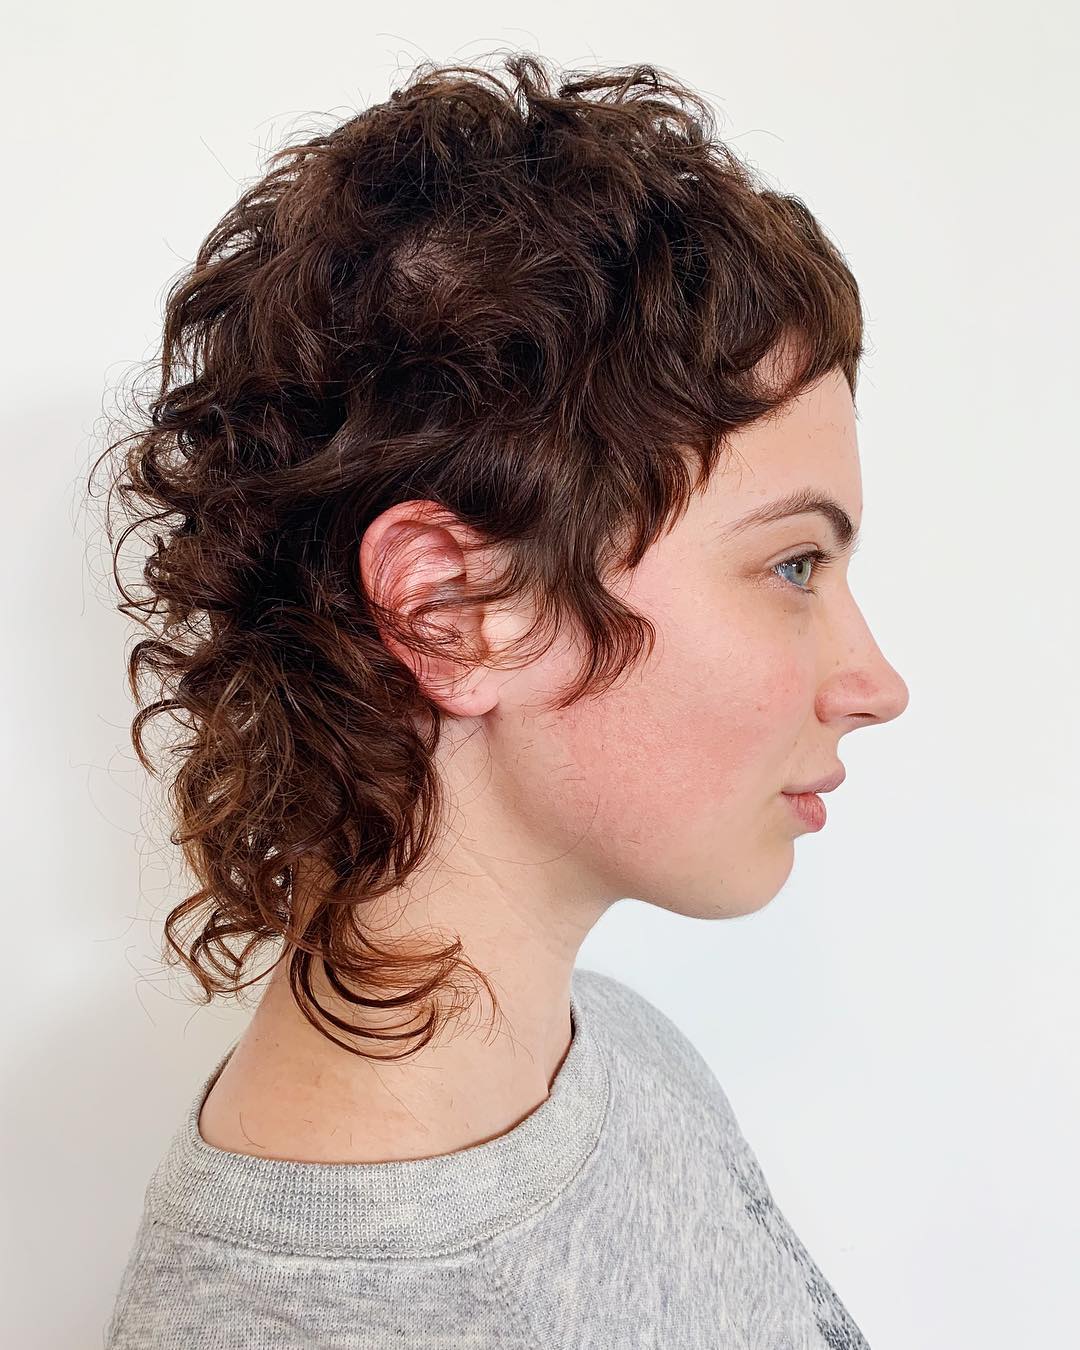 Androgynous Mullet with Short Bangs on Curly Hair